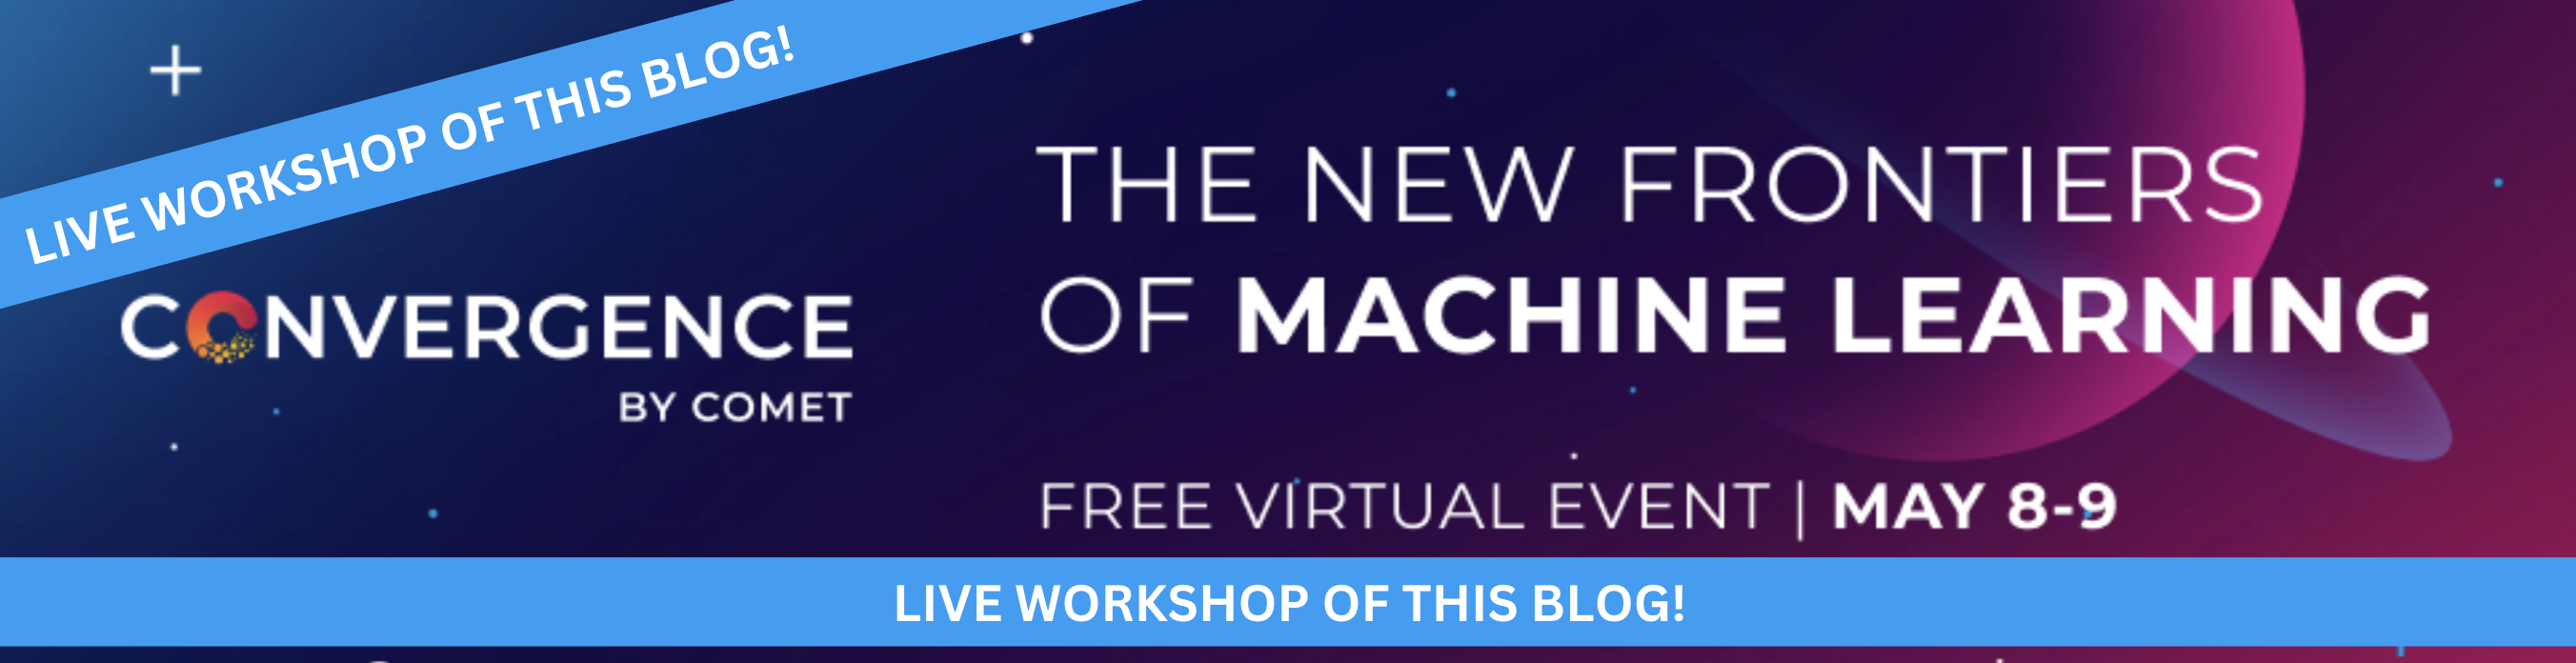 Join the live workshop of this blog on May 9th- for free!